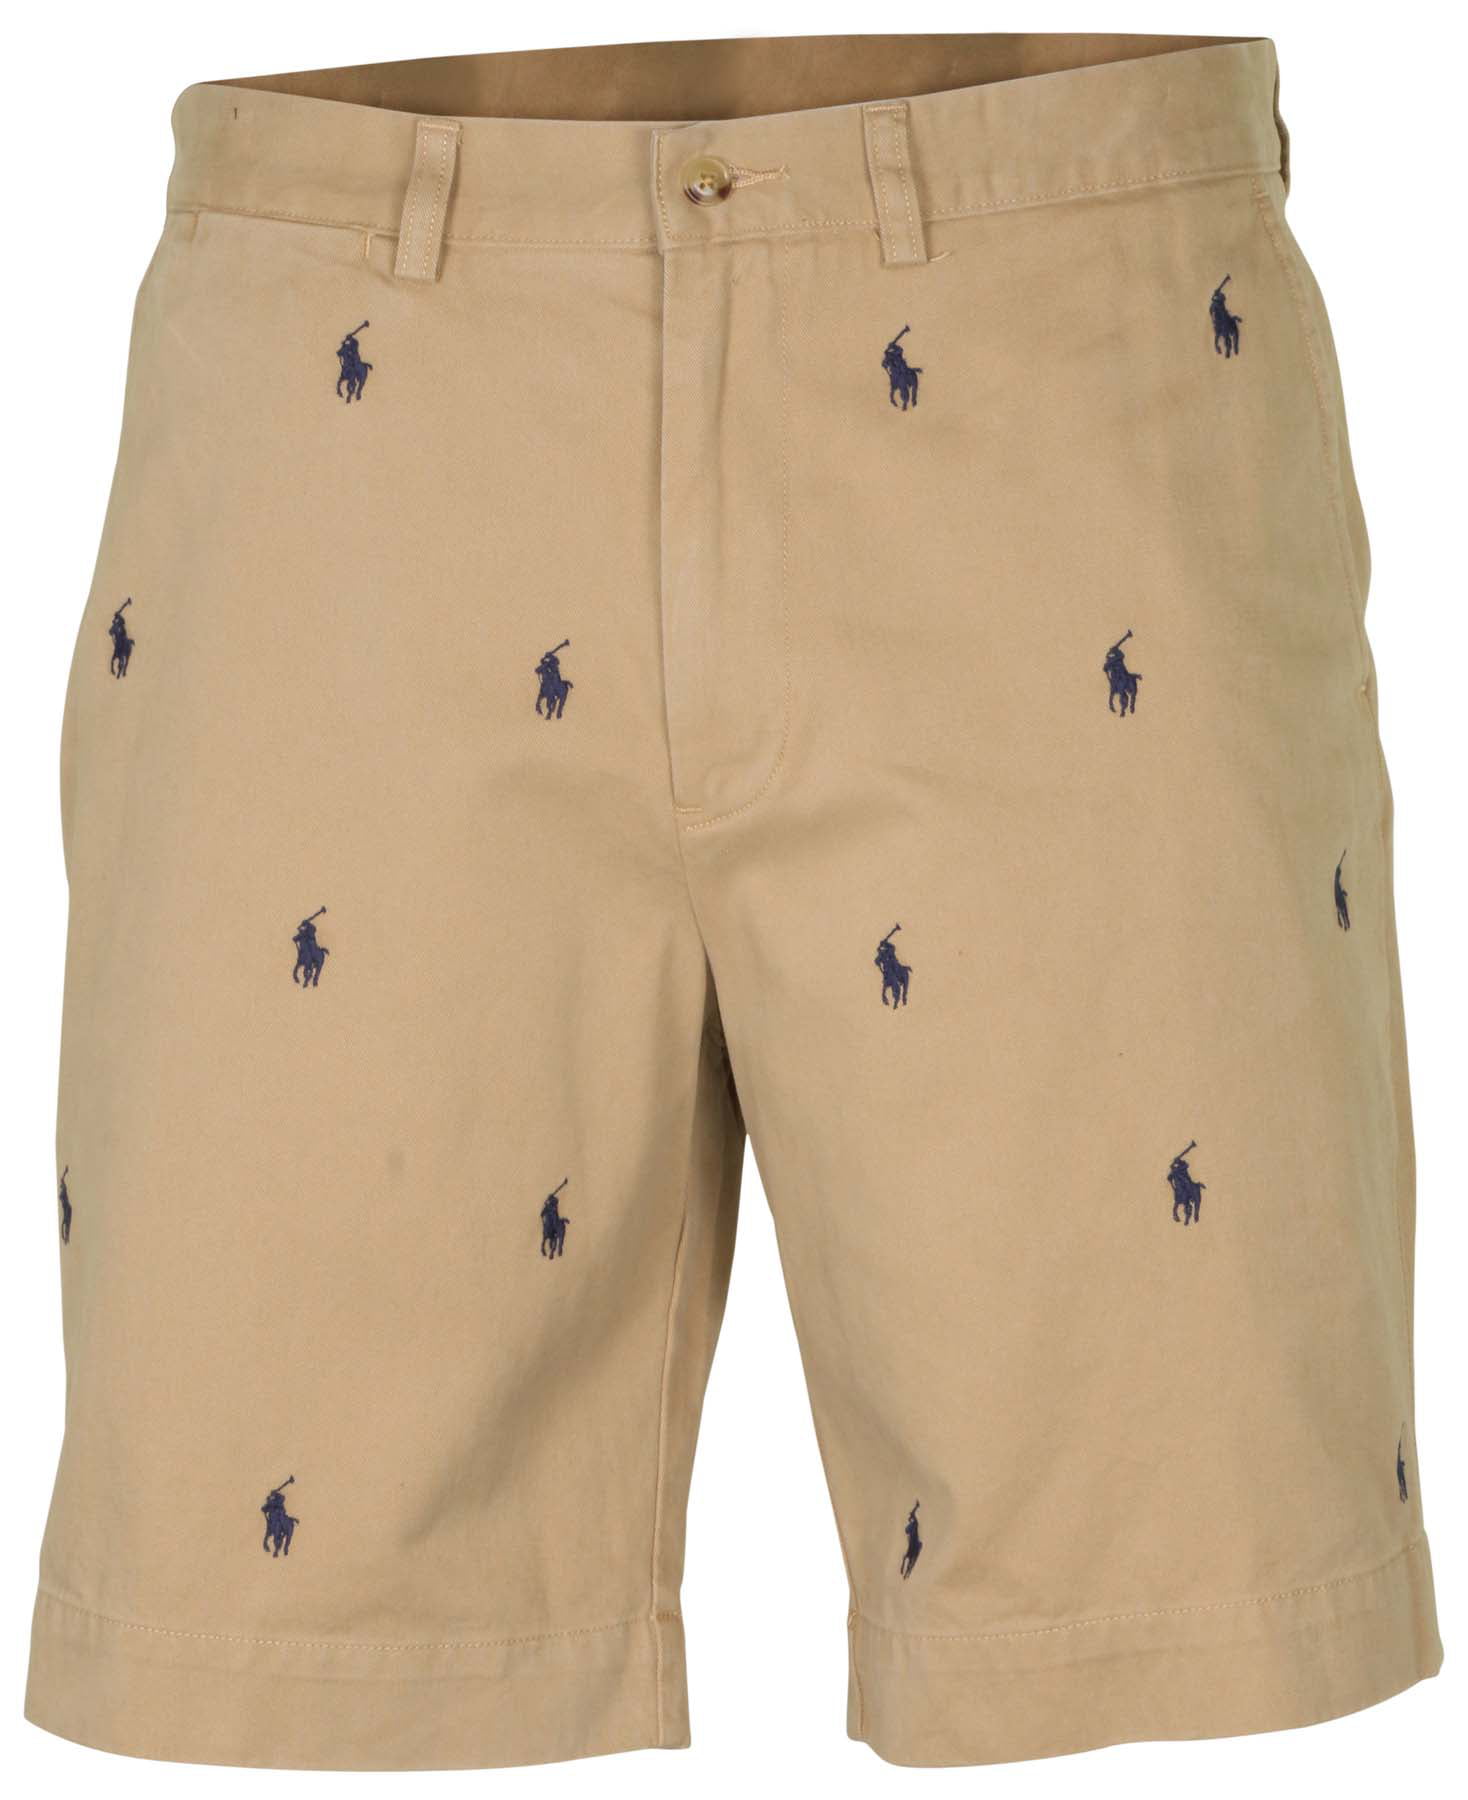 polo ralph lauren shorts with logo all over